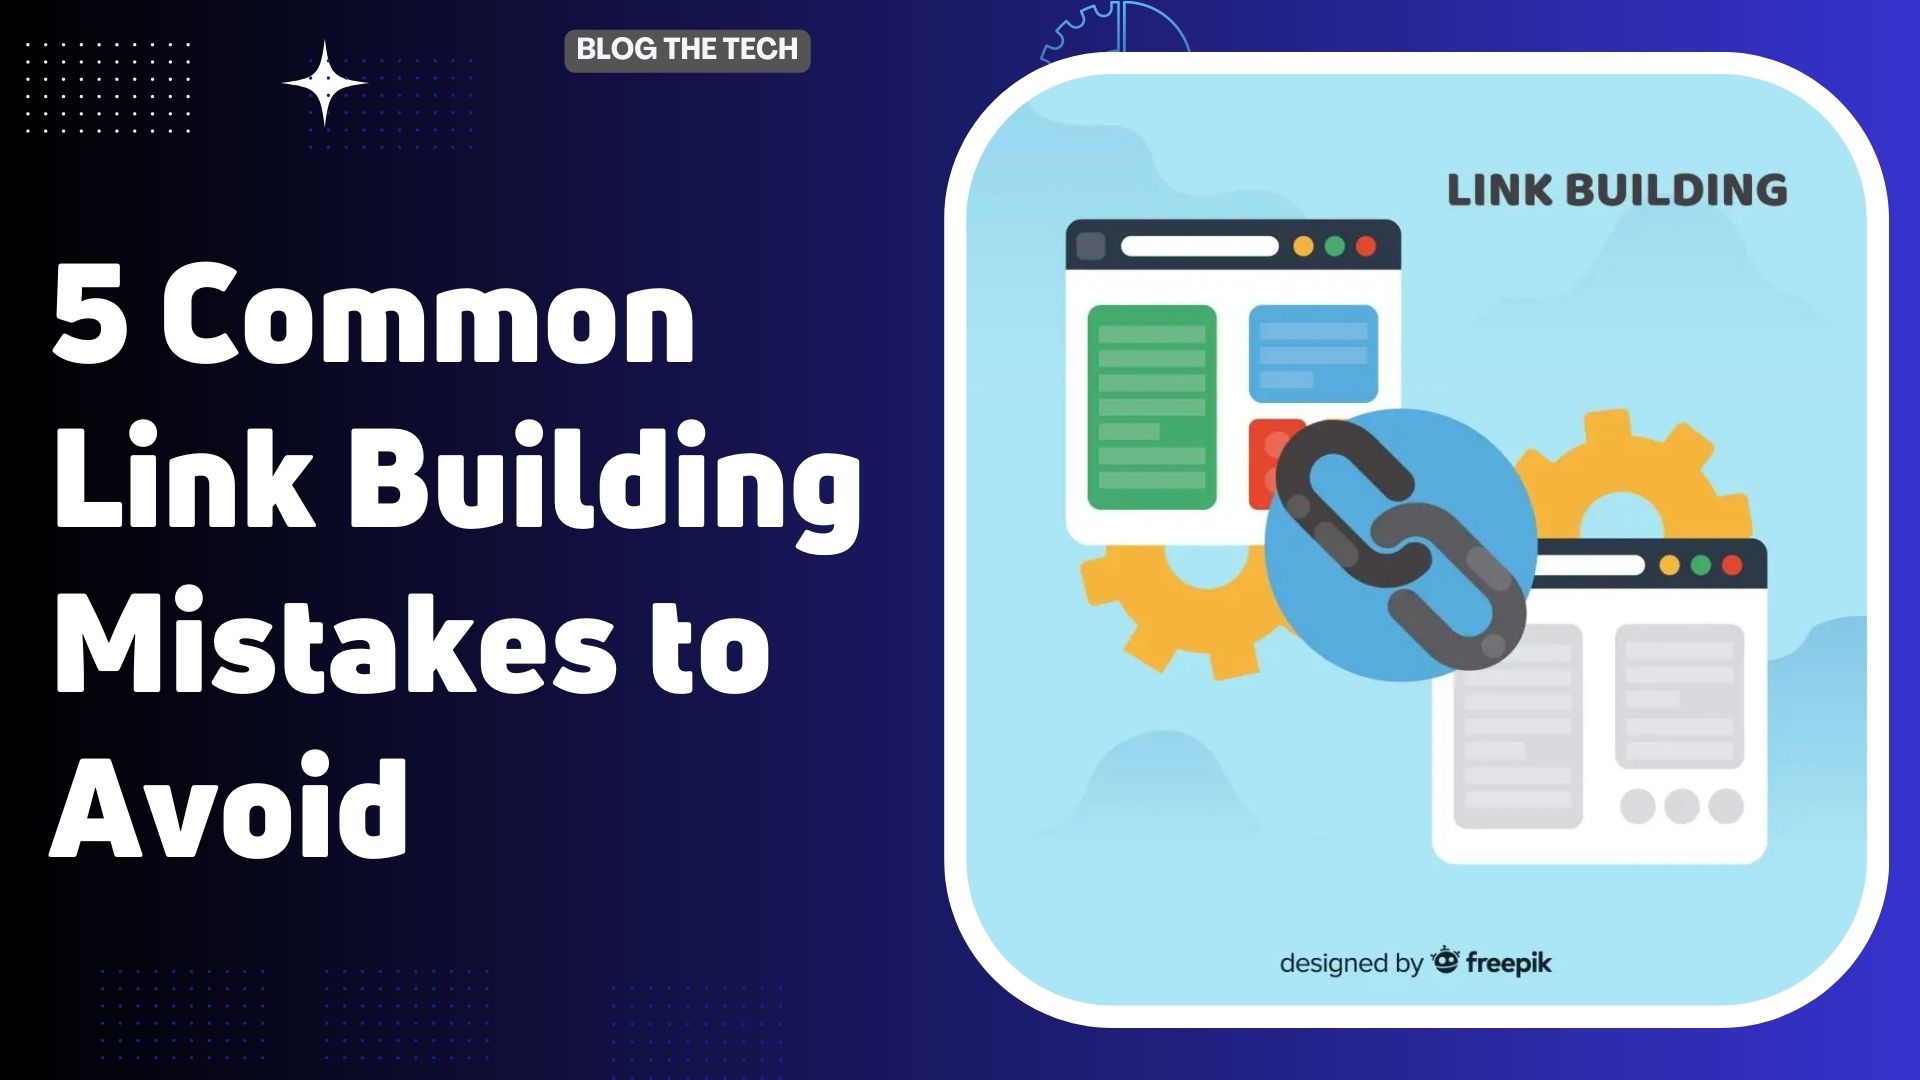 5 Common Link Building Mistakes to Avoid